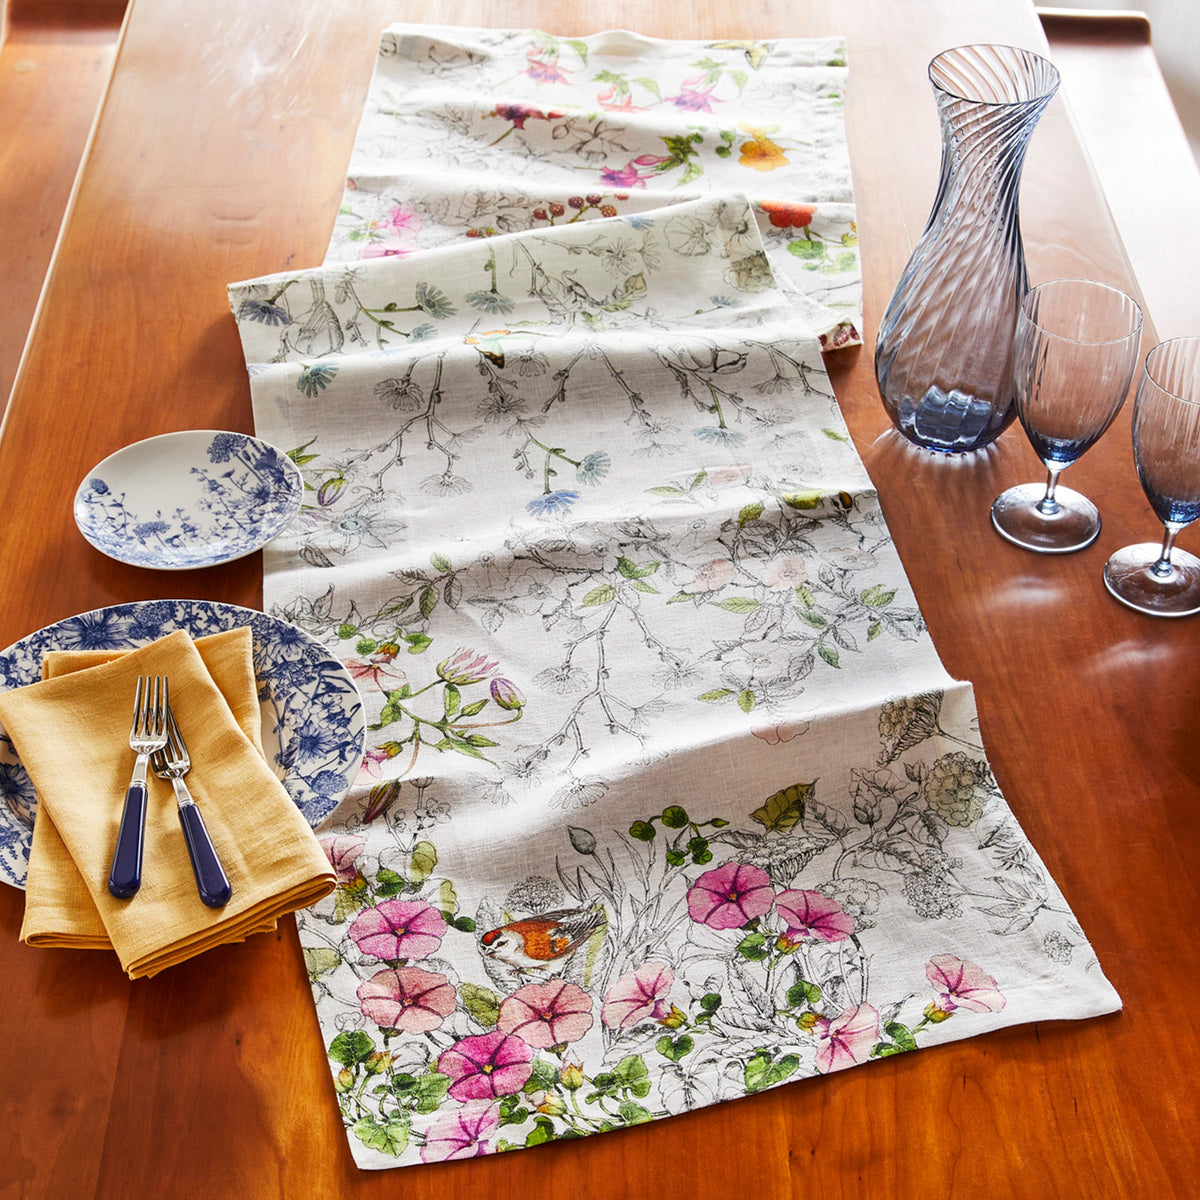 Nasturtium Print Table Runner in black and white with colored florals, birds and butterflies on Italian linen from Caskata